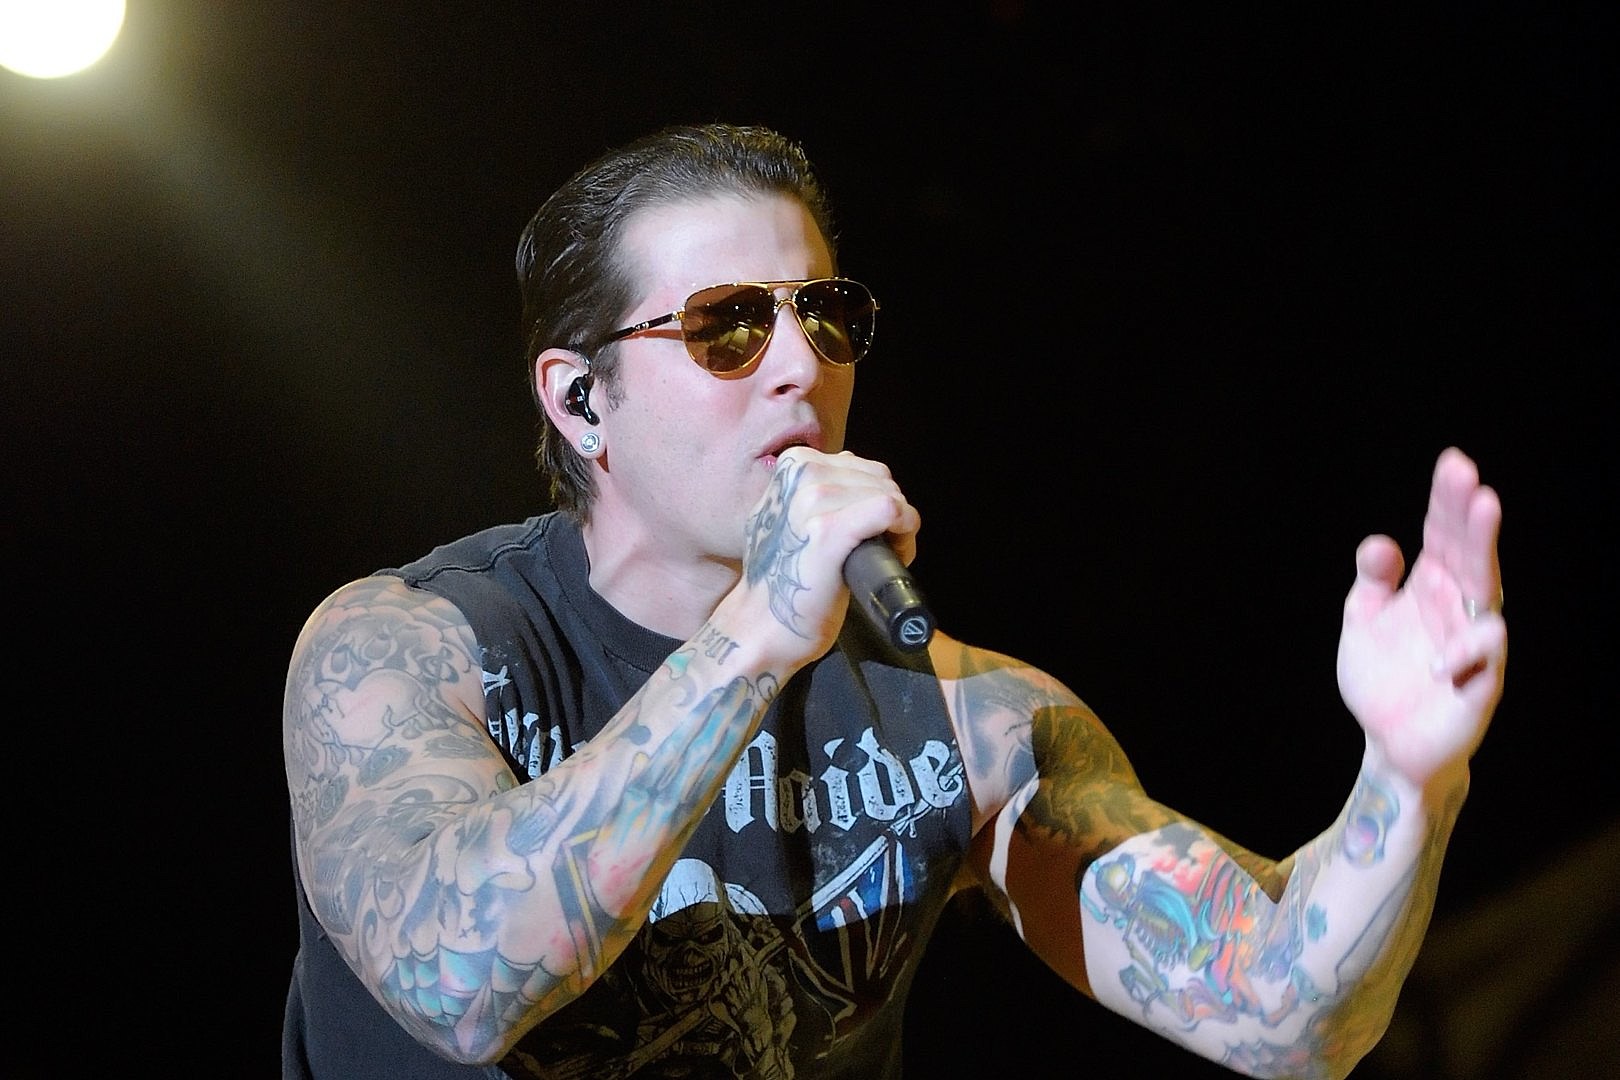 New Avenged Sevenfold Album Out by Summer 2022, M. Shadows Says